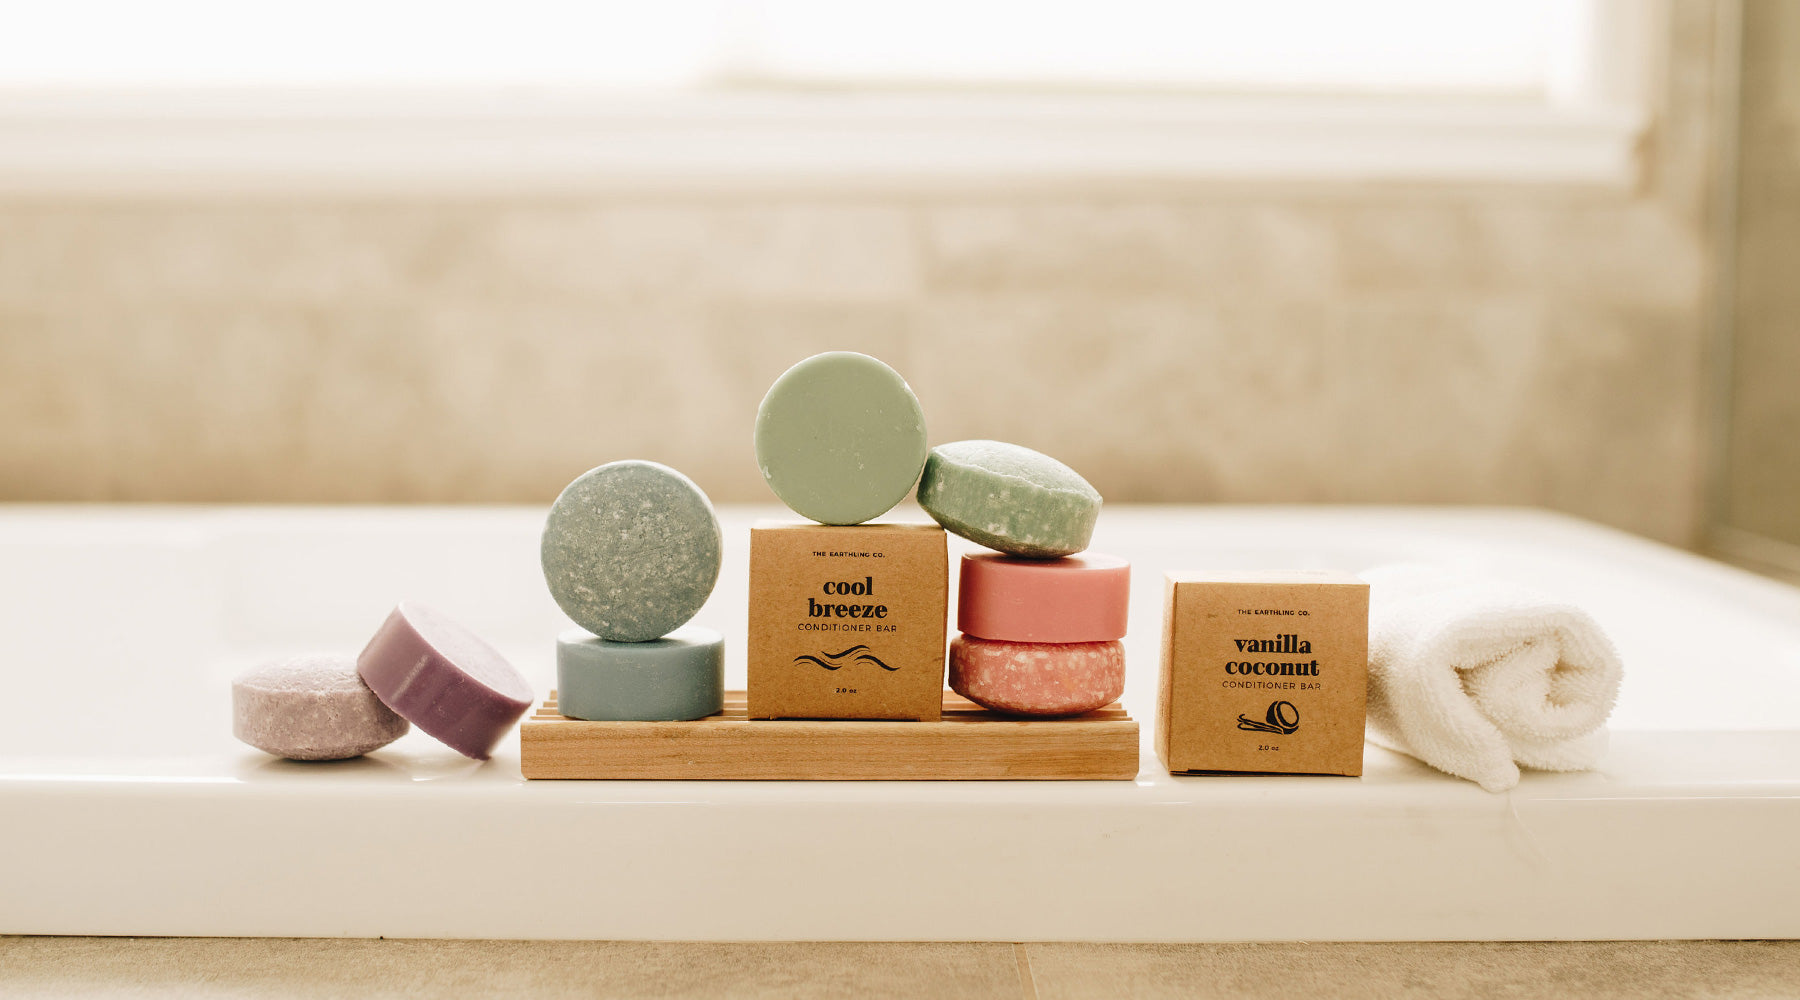 How to Store Shampoo Bars - The Earthling Co.